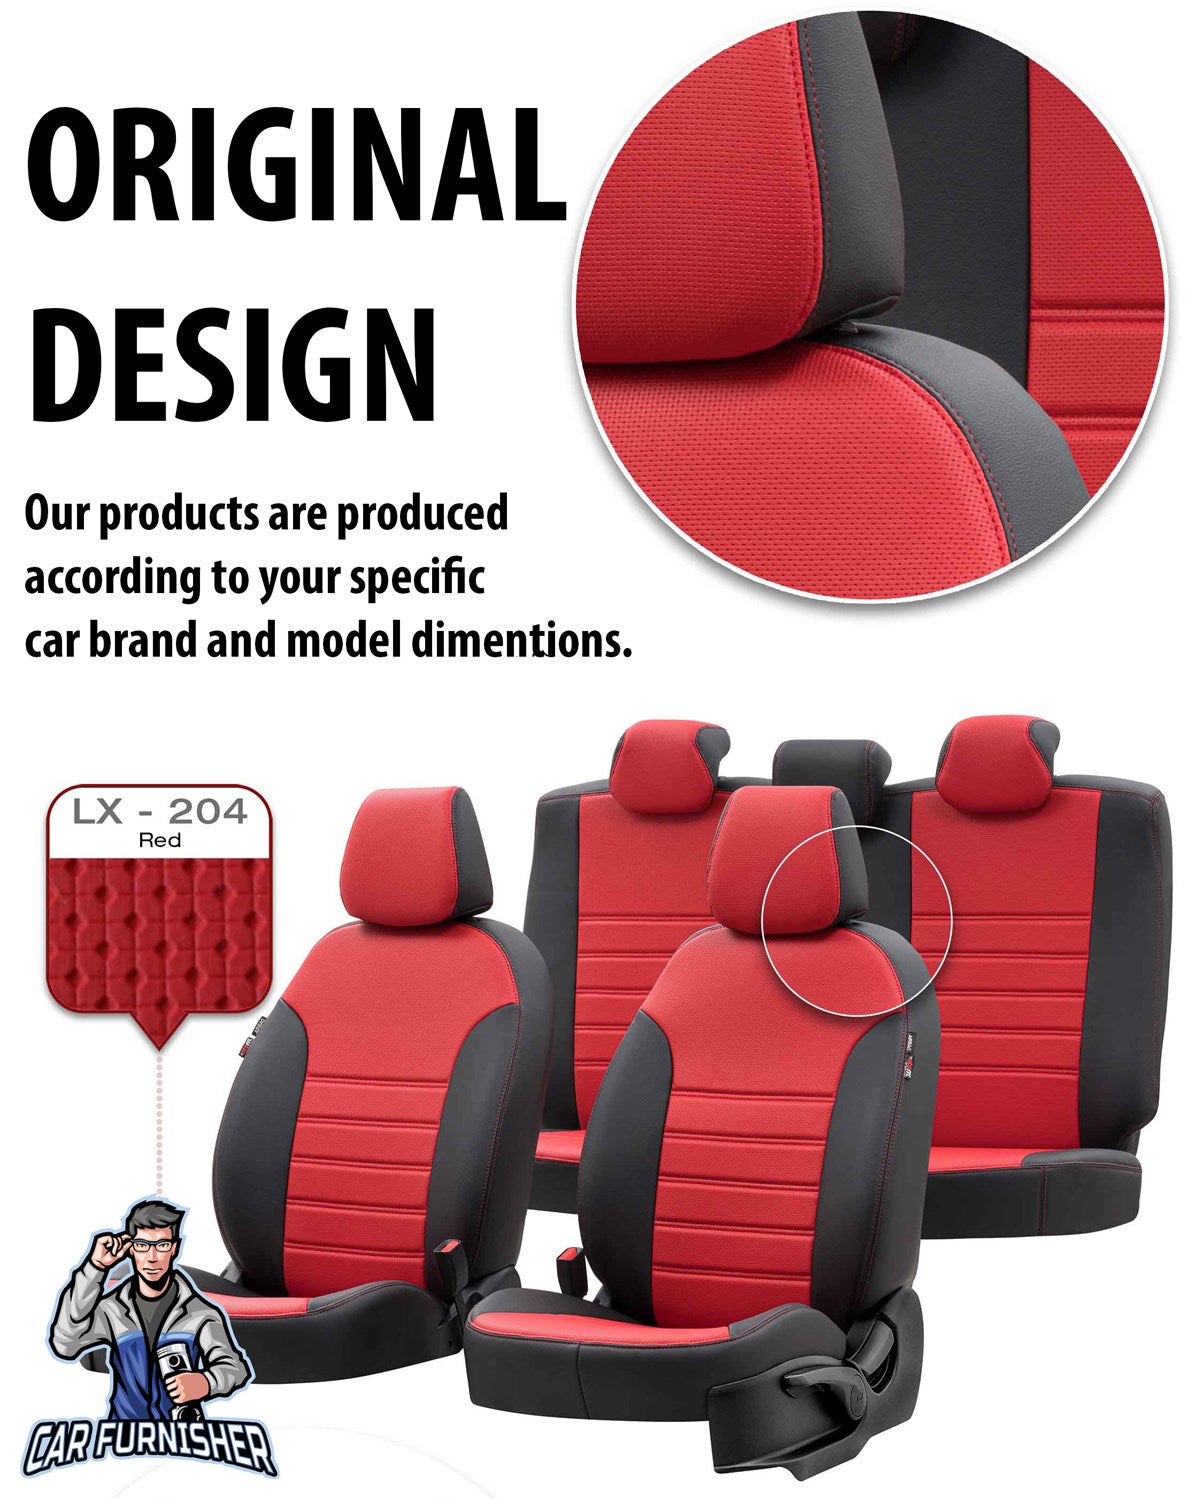 Toyota Corolla Seat Cover New York Leather Design Smoked Black Leather